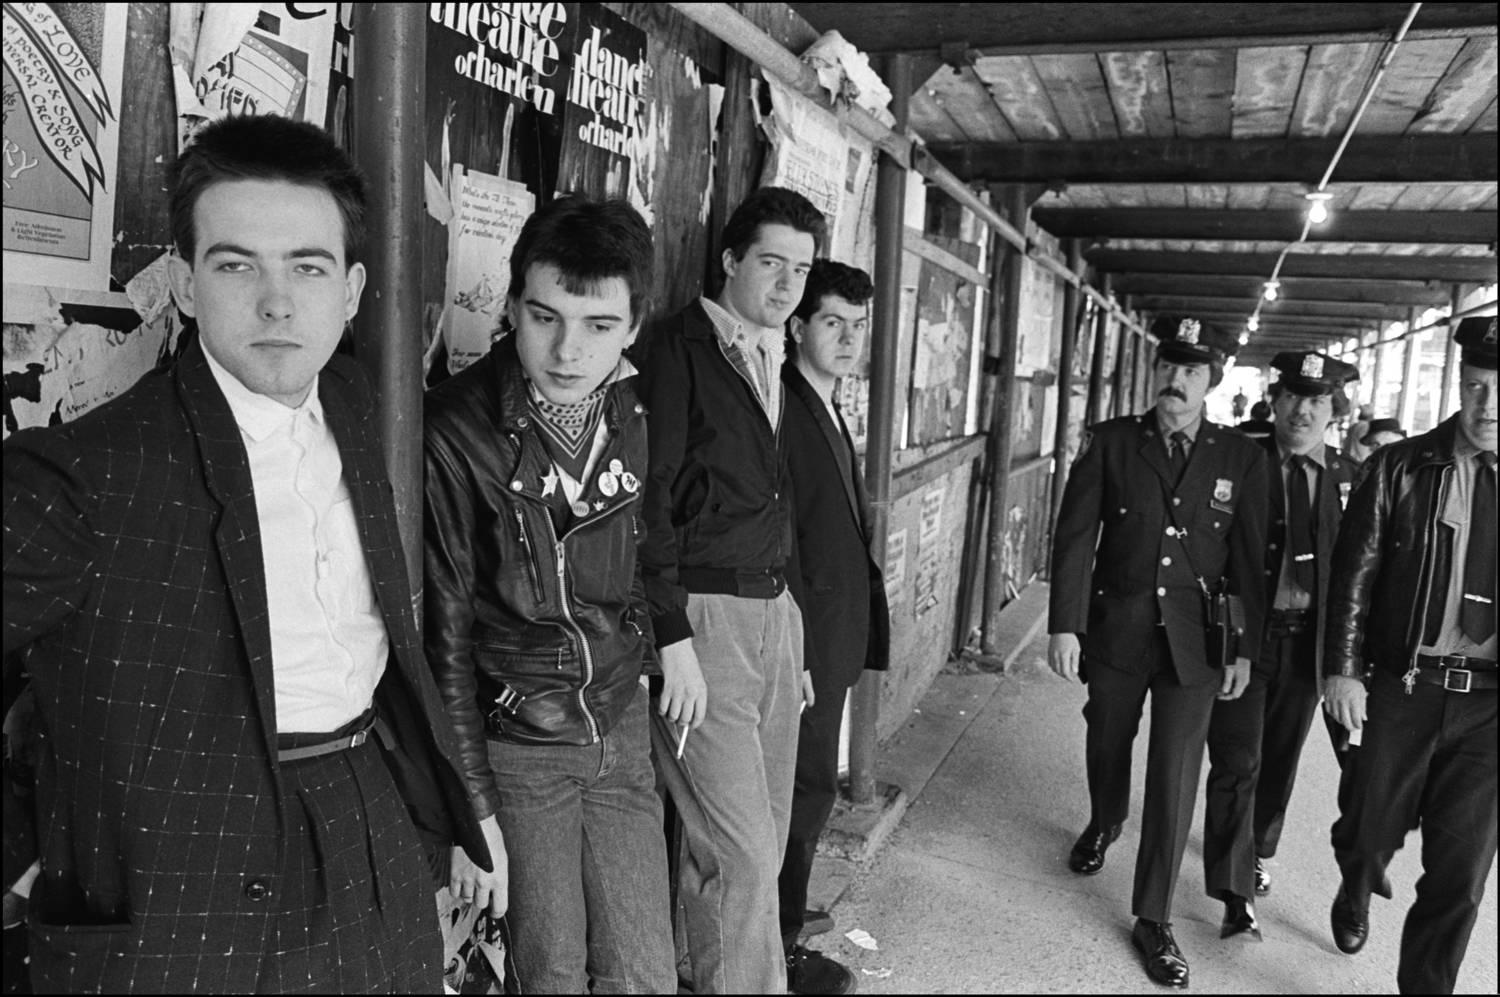 Allan Tannenbaum Black and White Photograph - The Cure gets caught on Columbus Ave., NYC